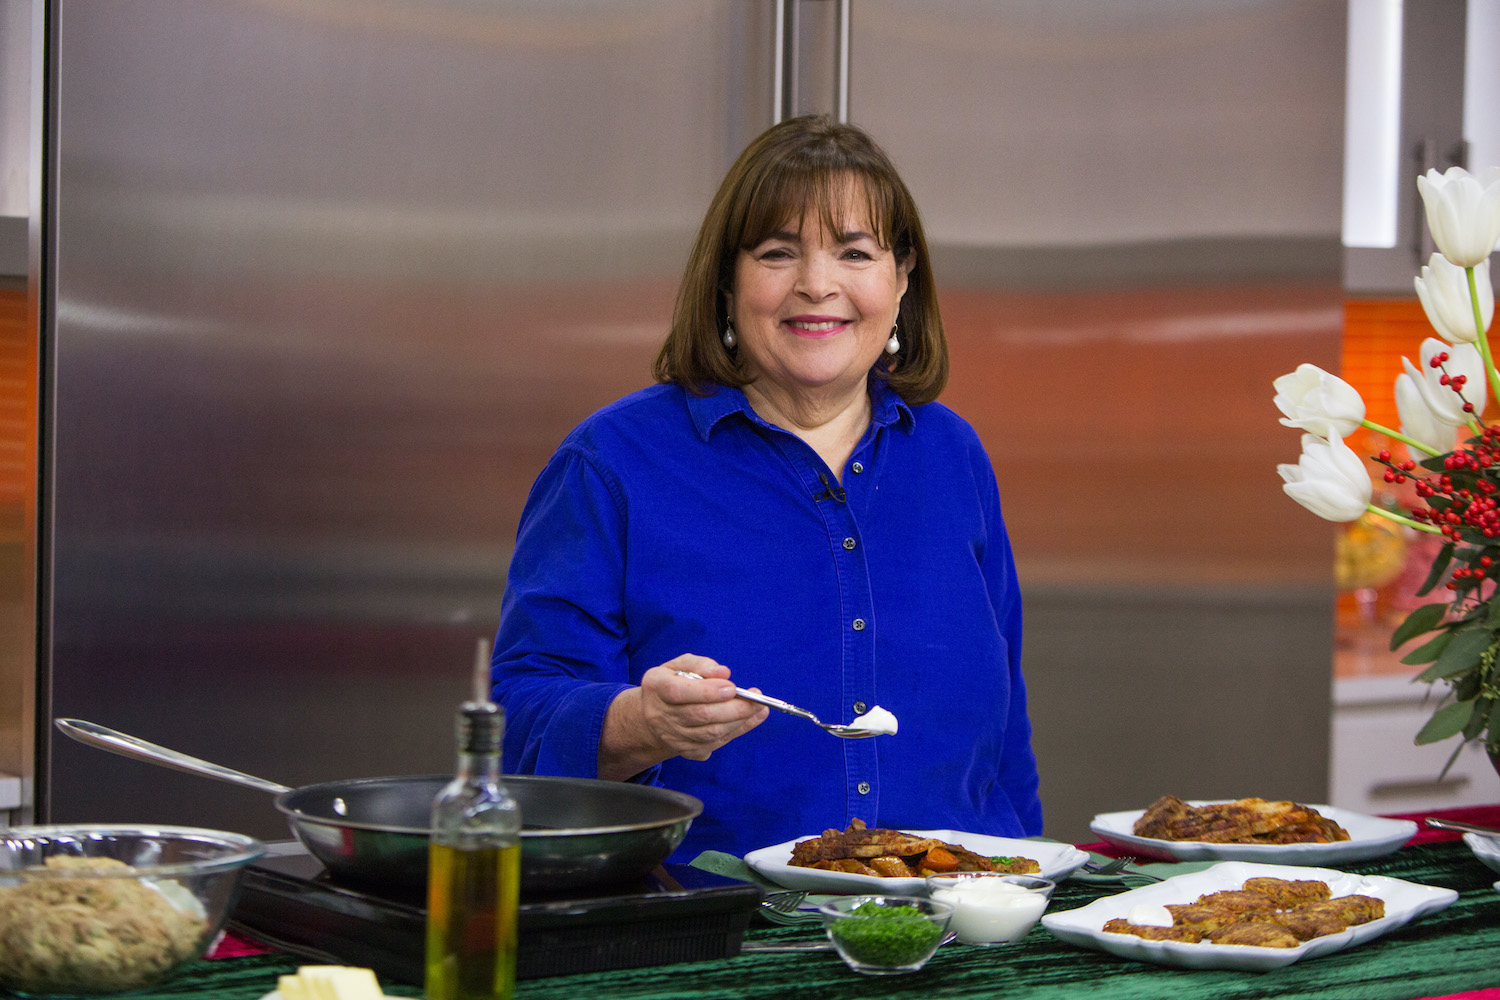 Ina Garten smiles as she holds a spoon on the Today show in 2017